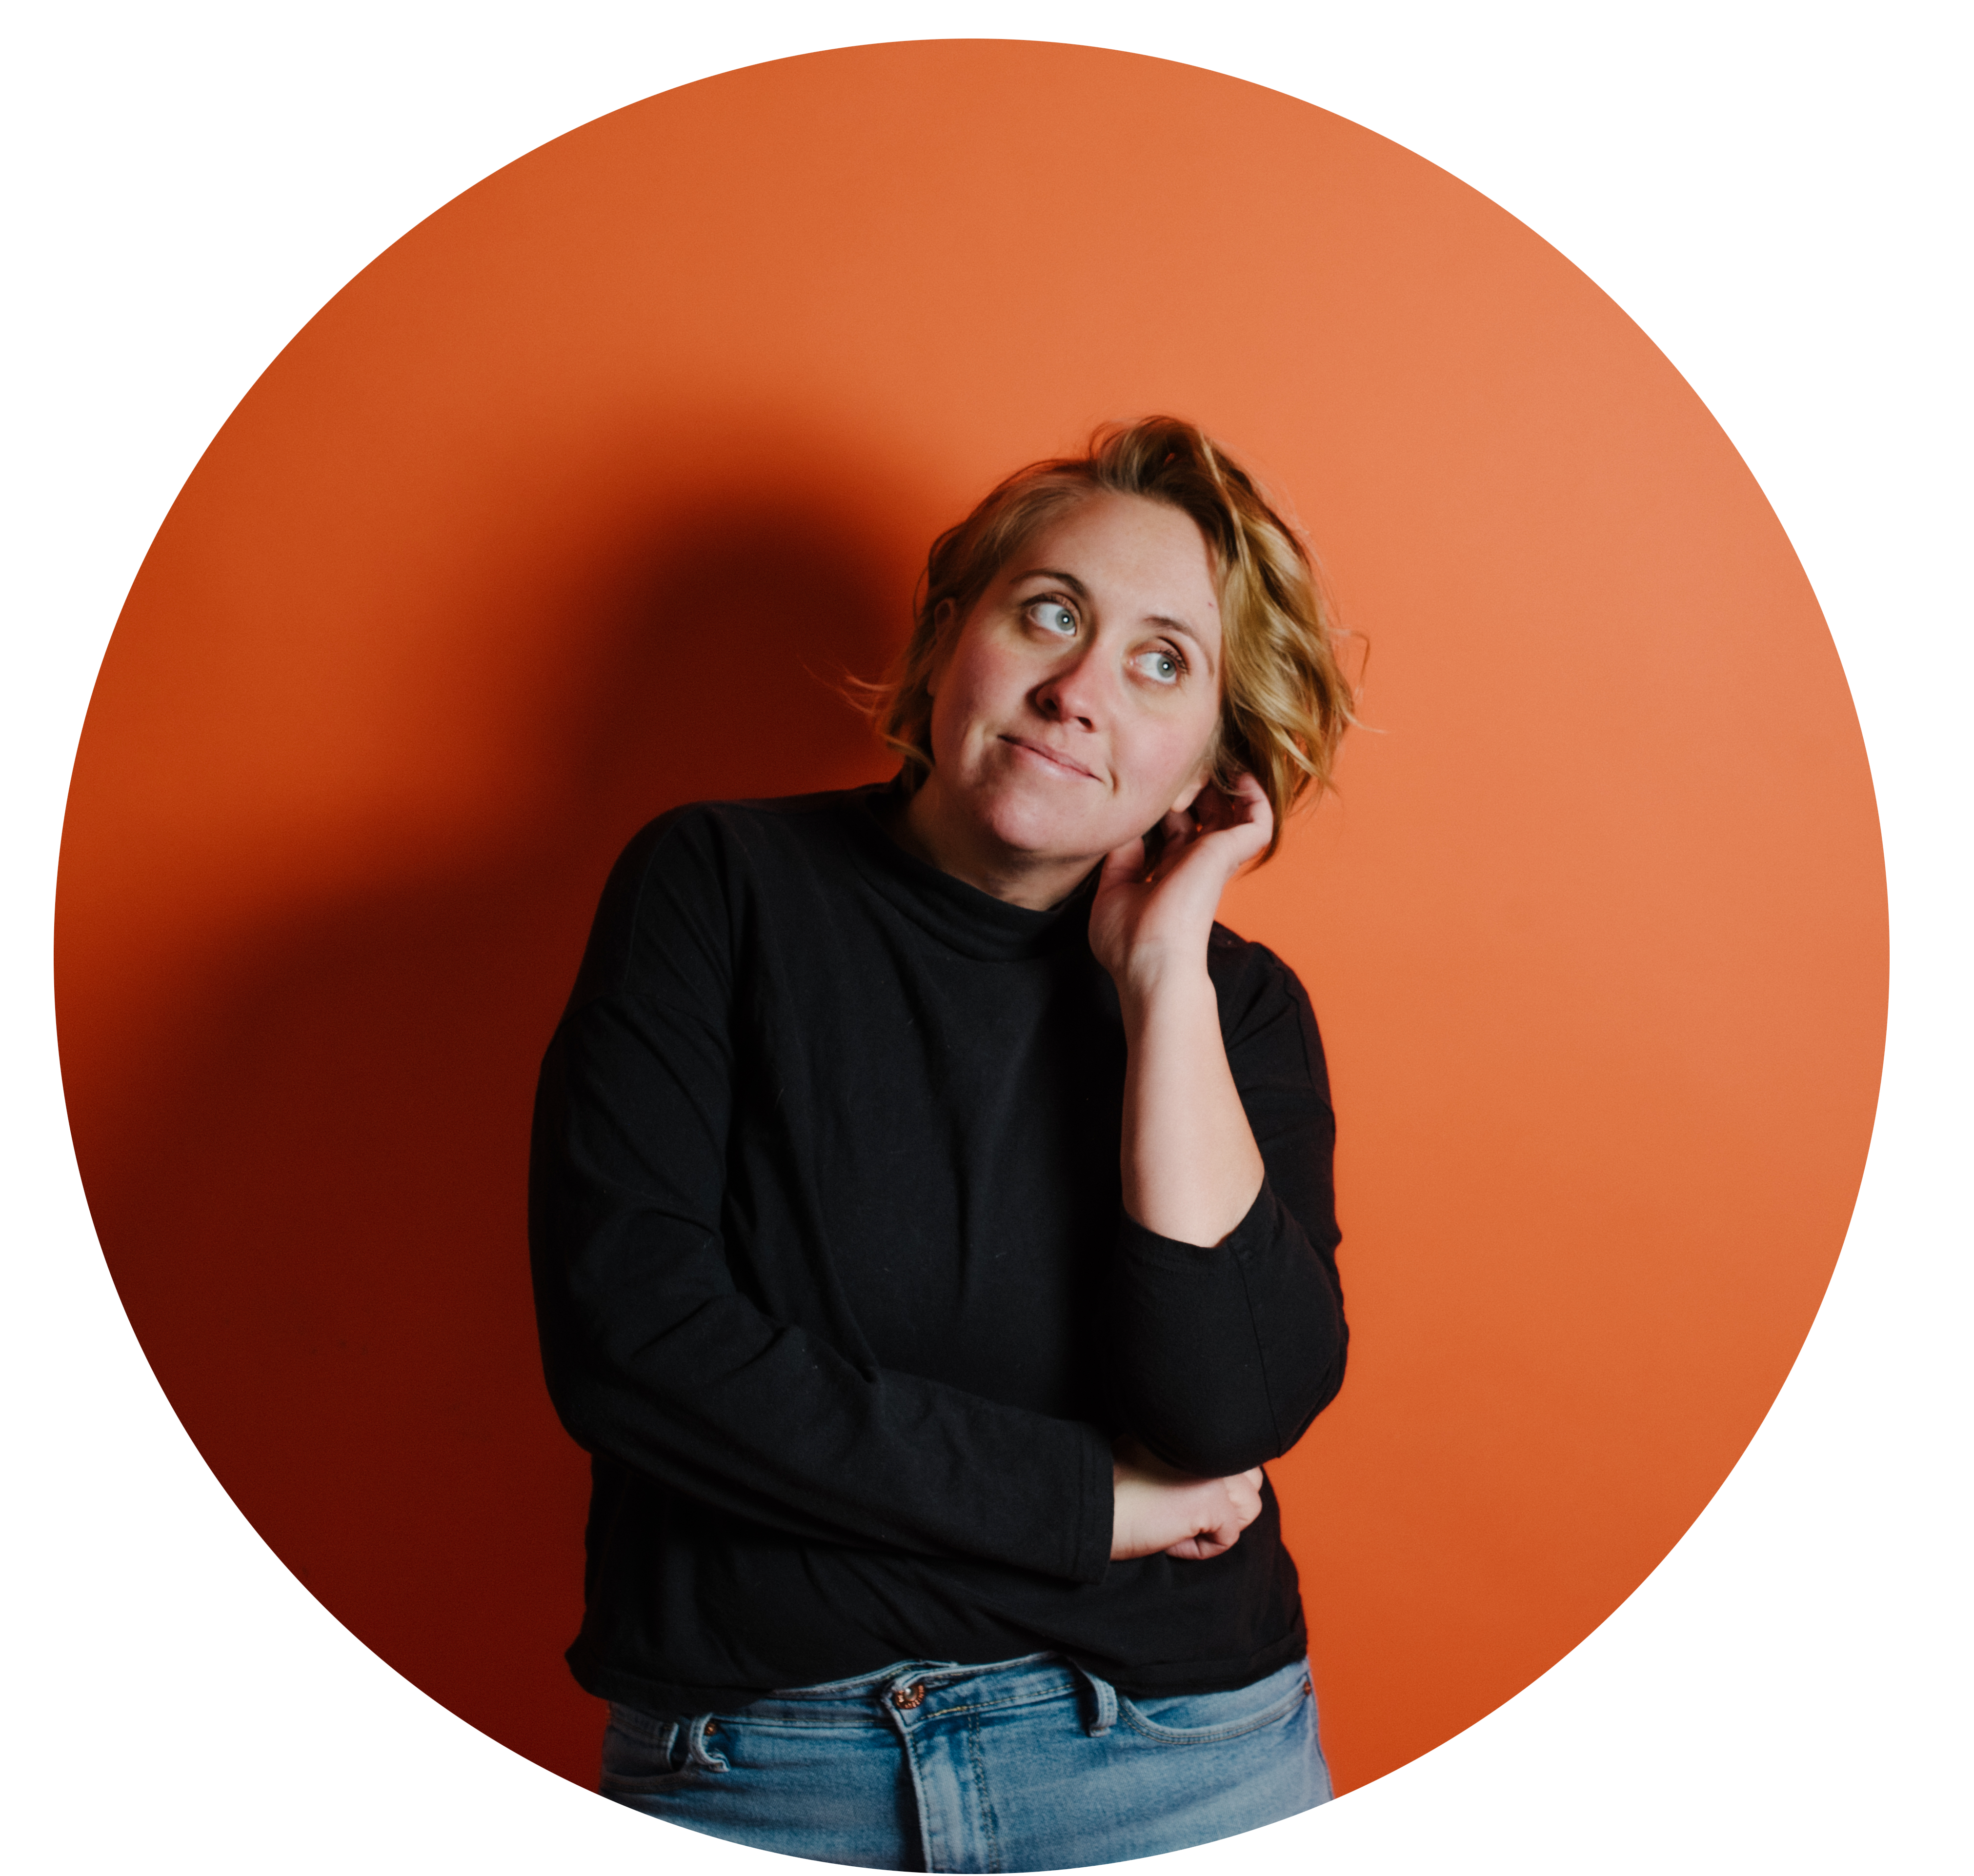 photo of the photographer with short blonde hair wearing a black turtleneck and blue jeans on orange backdrop leaning her head on her left hand looking up